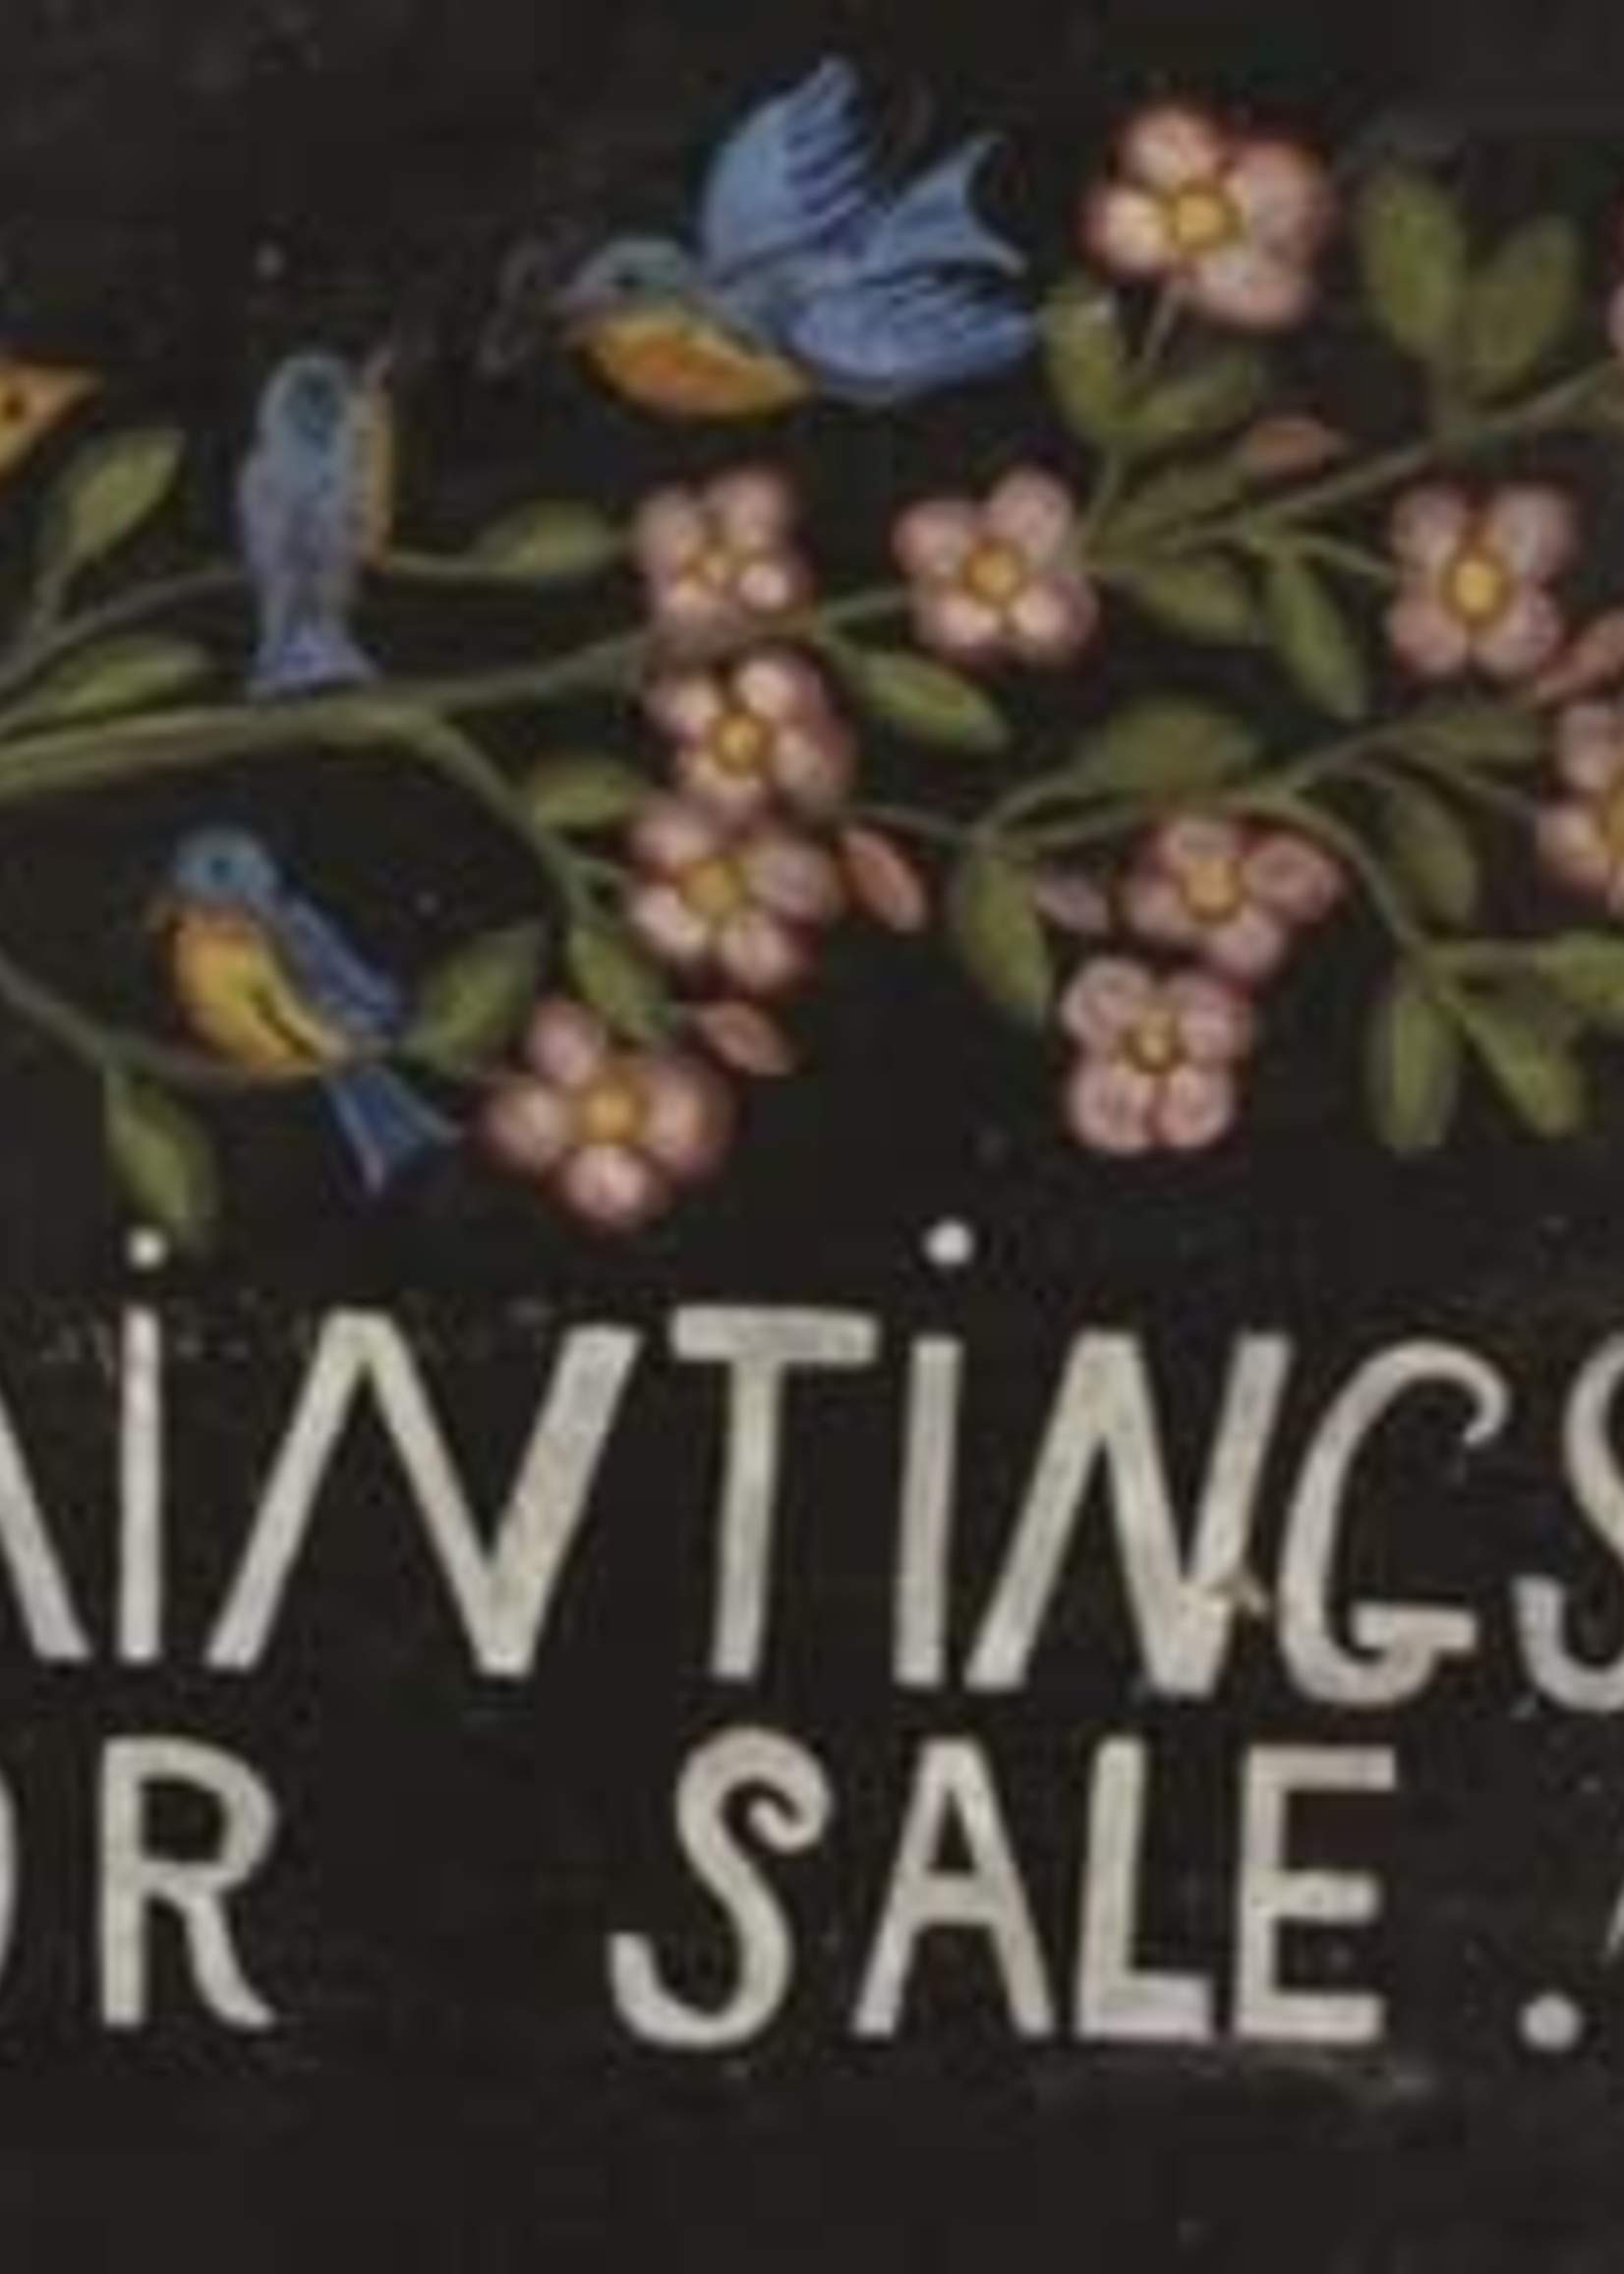 Maud Lewis: Paintings for Sale by Sarah Milroy